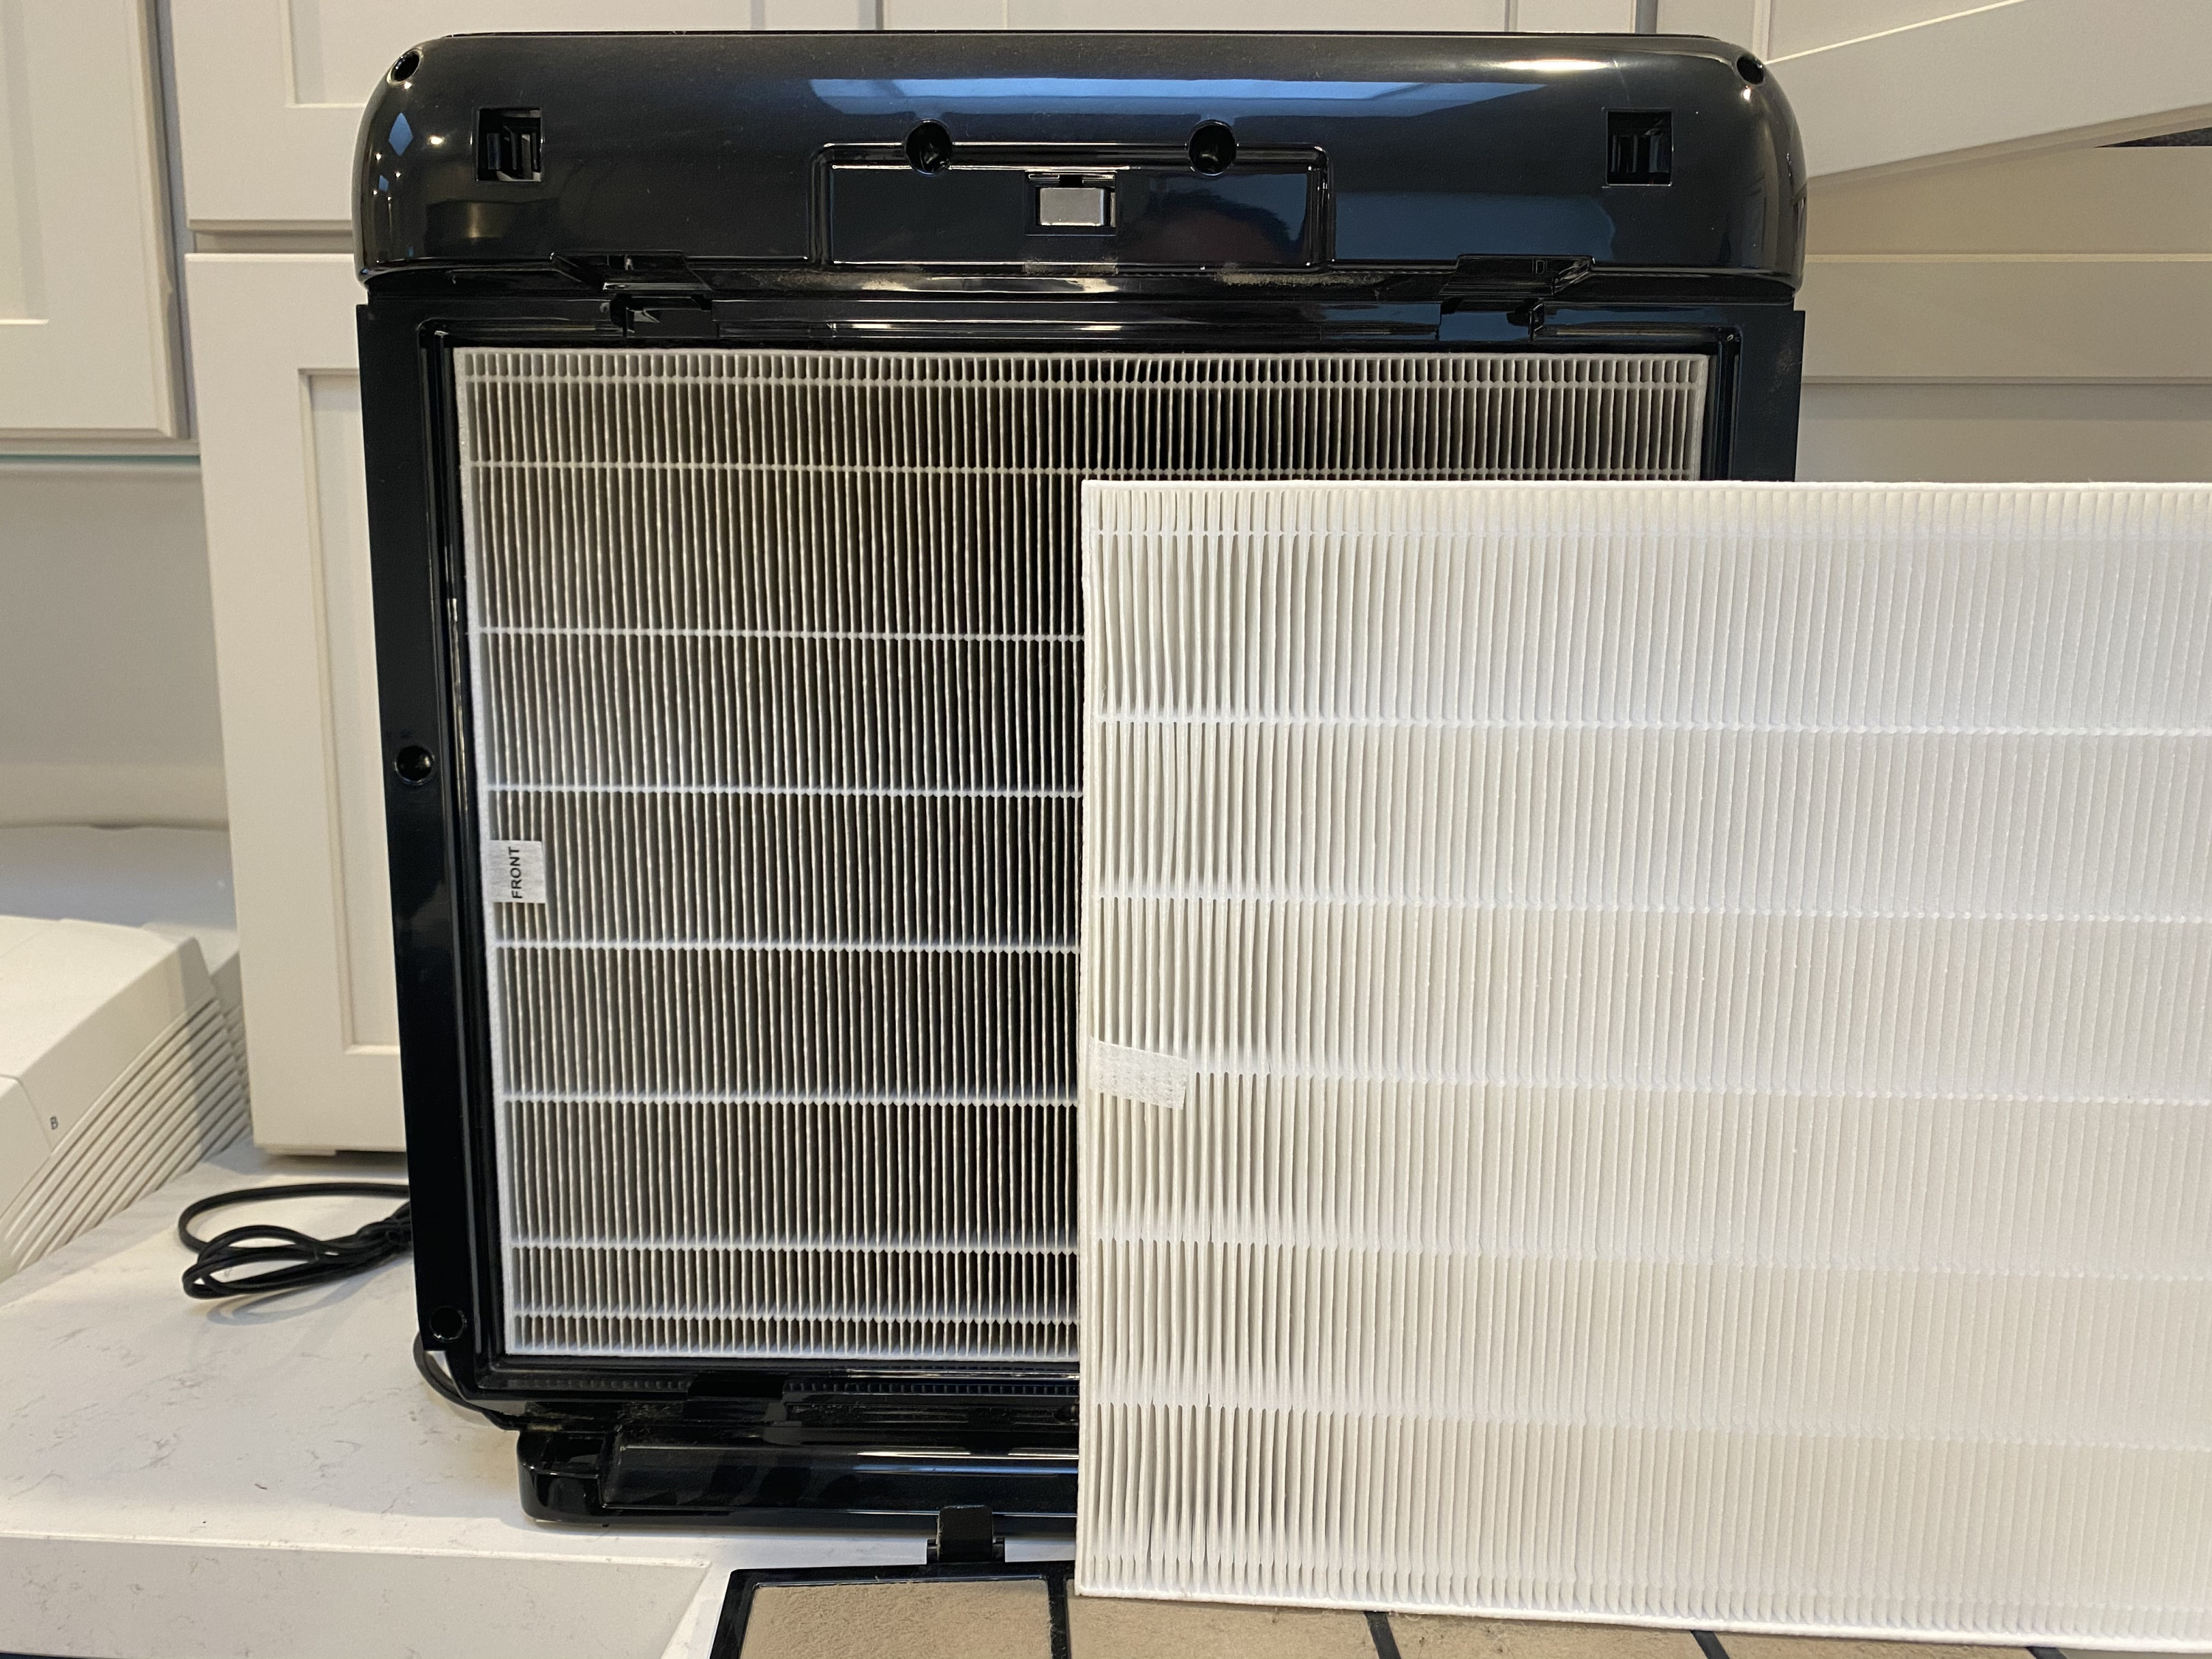 Our Coway unit HEPA filter before and after.